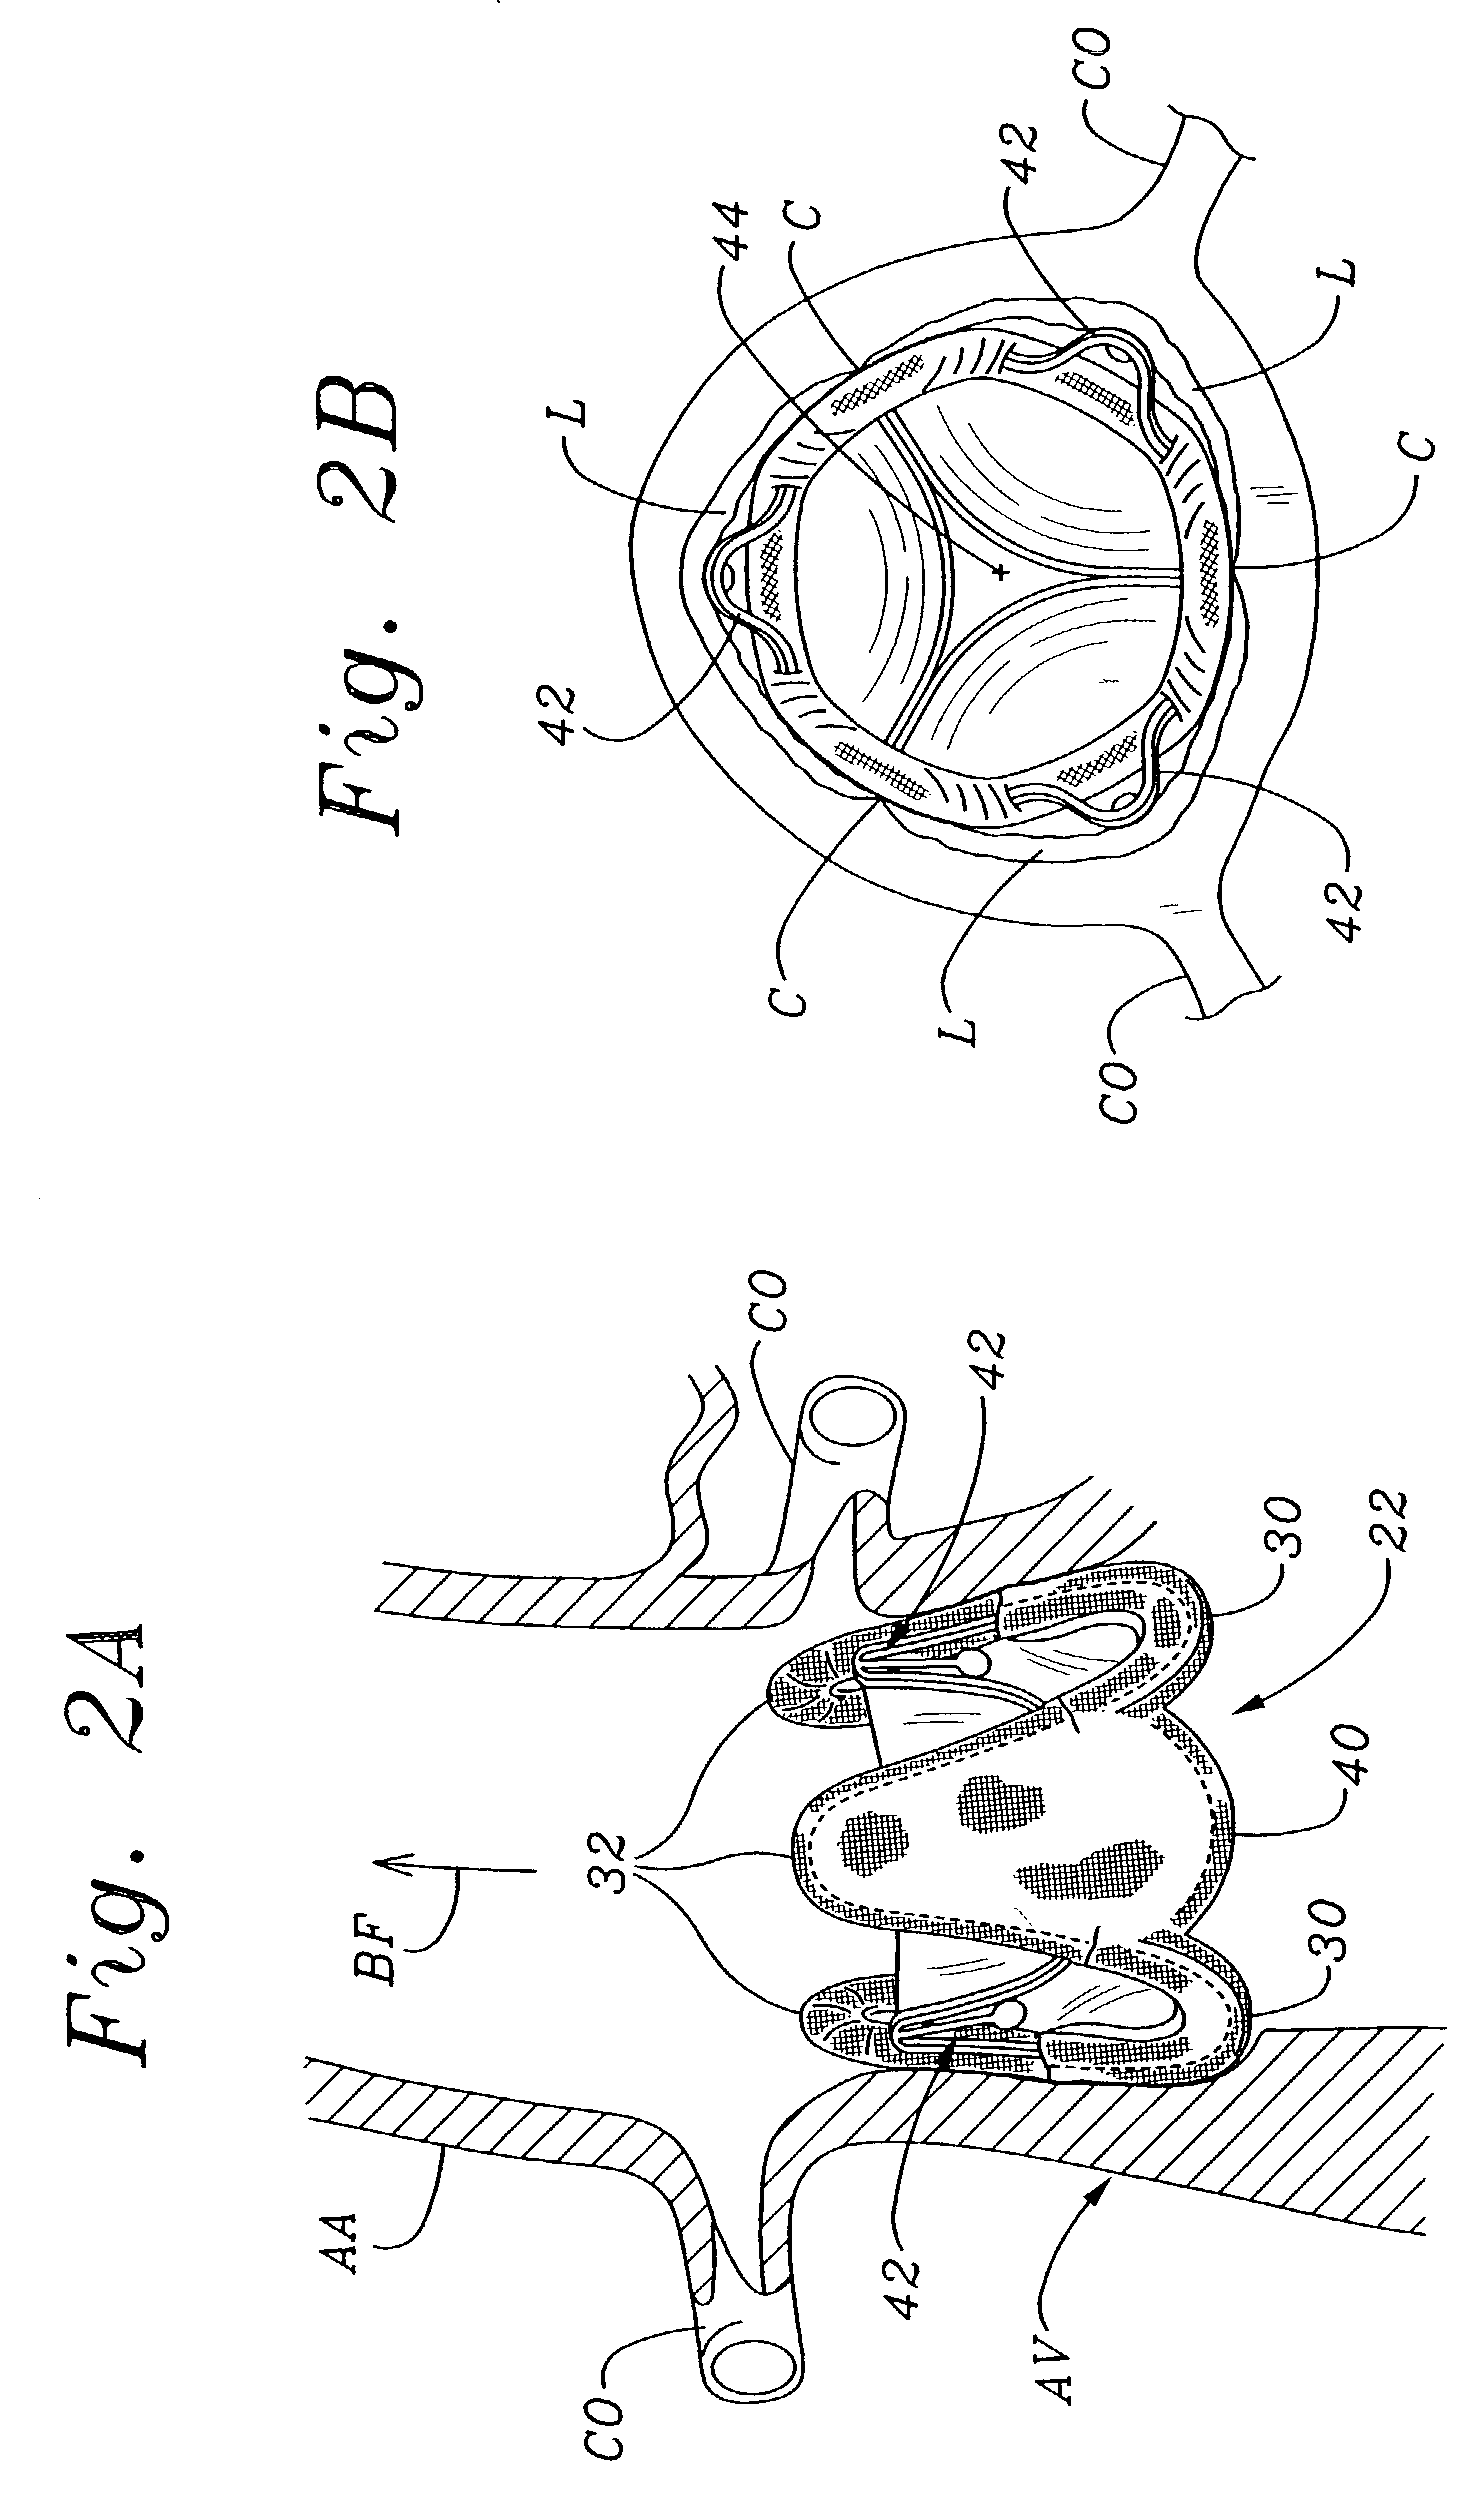 Minimally-invasive heart valve with cusp positioners